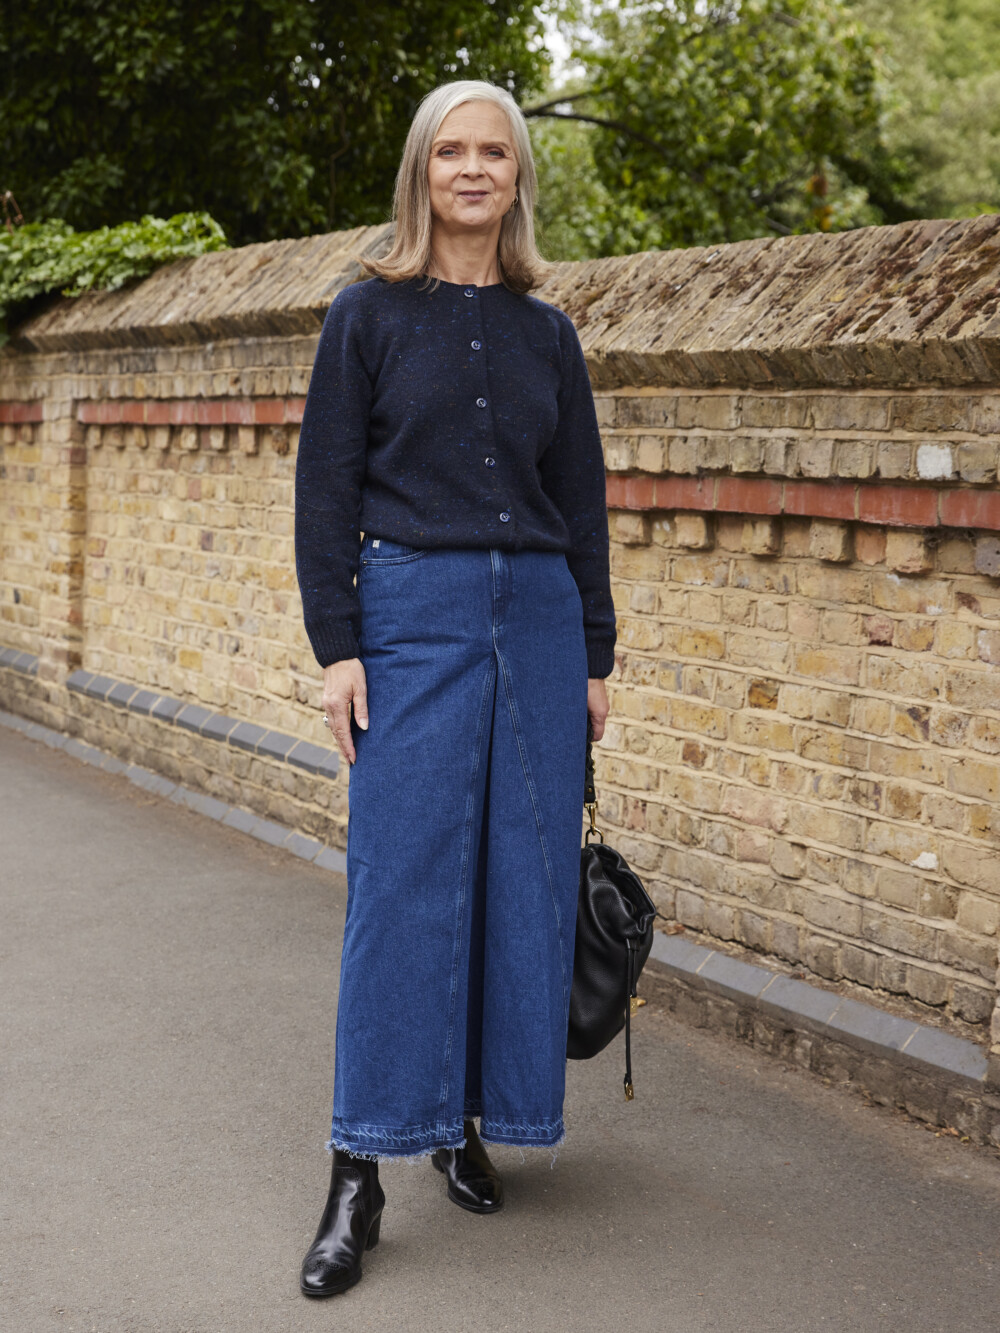 Denim maxi skirts are everywhere – but can you walk in them?